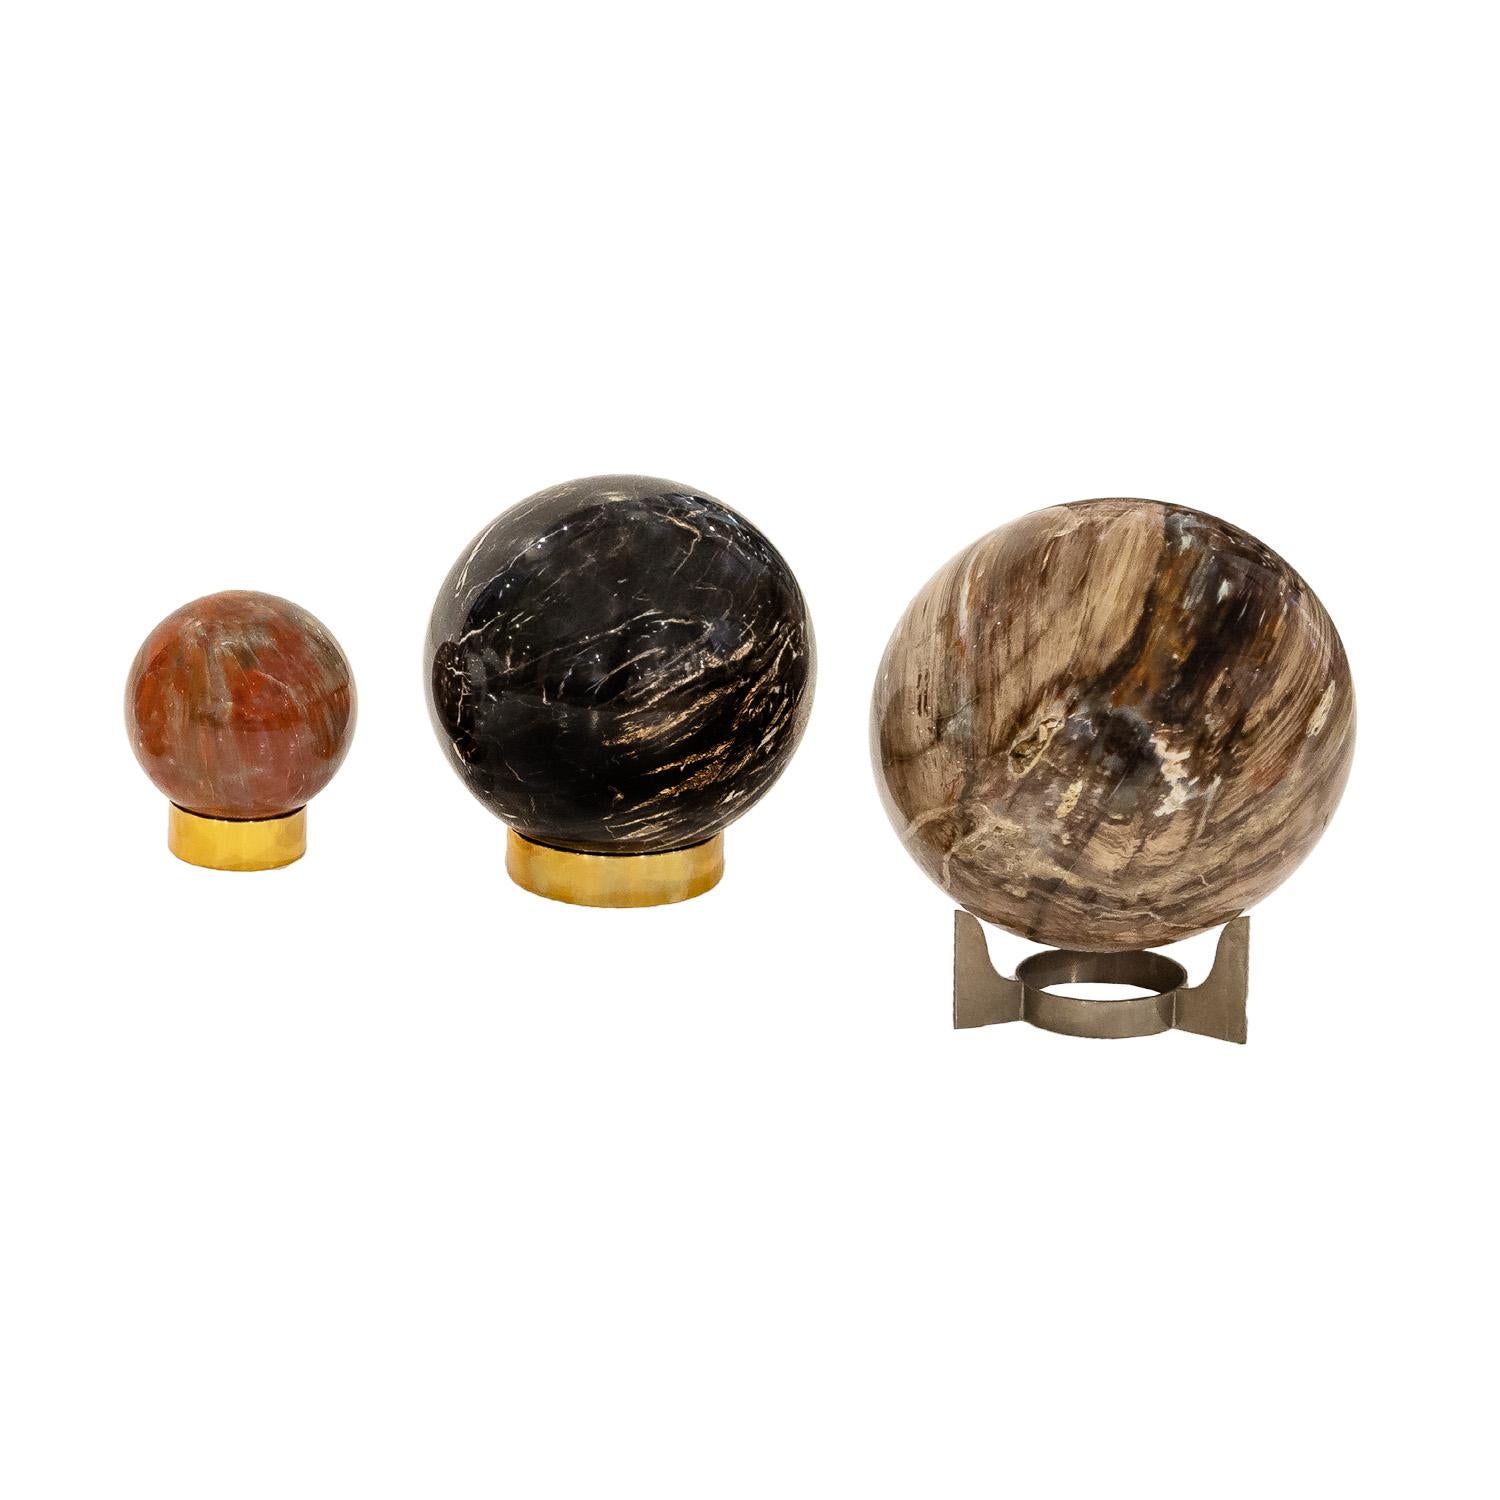 Set of 3 polished petrified wood orbs on custom metal bases by Karl Springer, American 1980's (retain original labels from the 1980s showing the original prices). Stunning materials and superb craftsmanship were the hallmark’s of Karl Springer’s